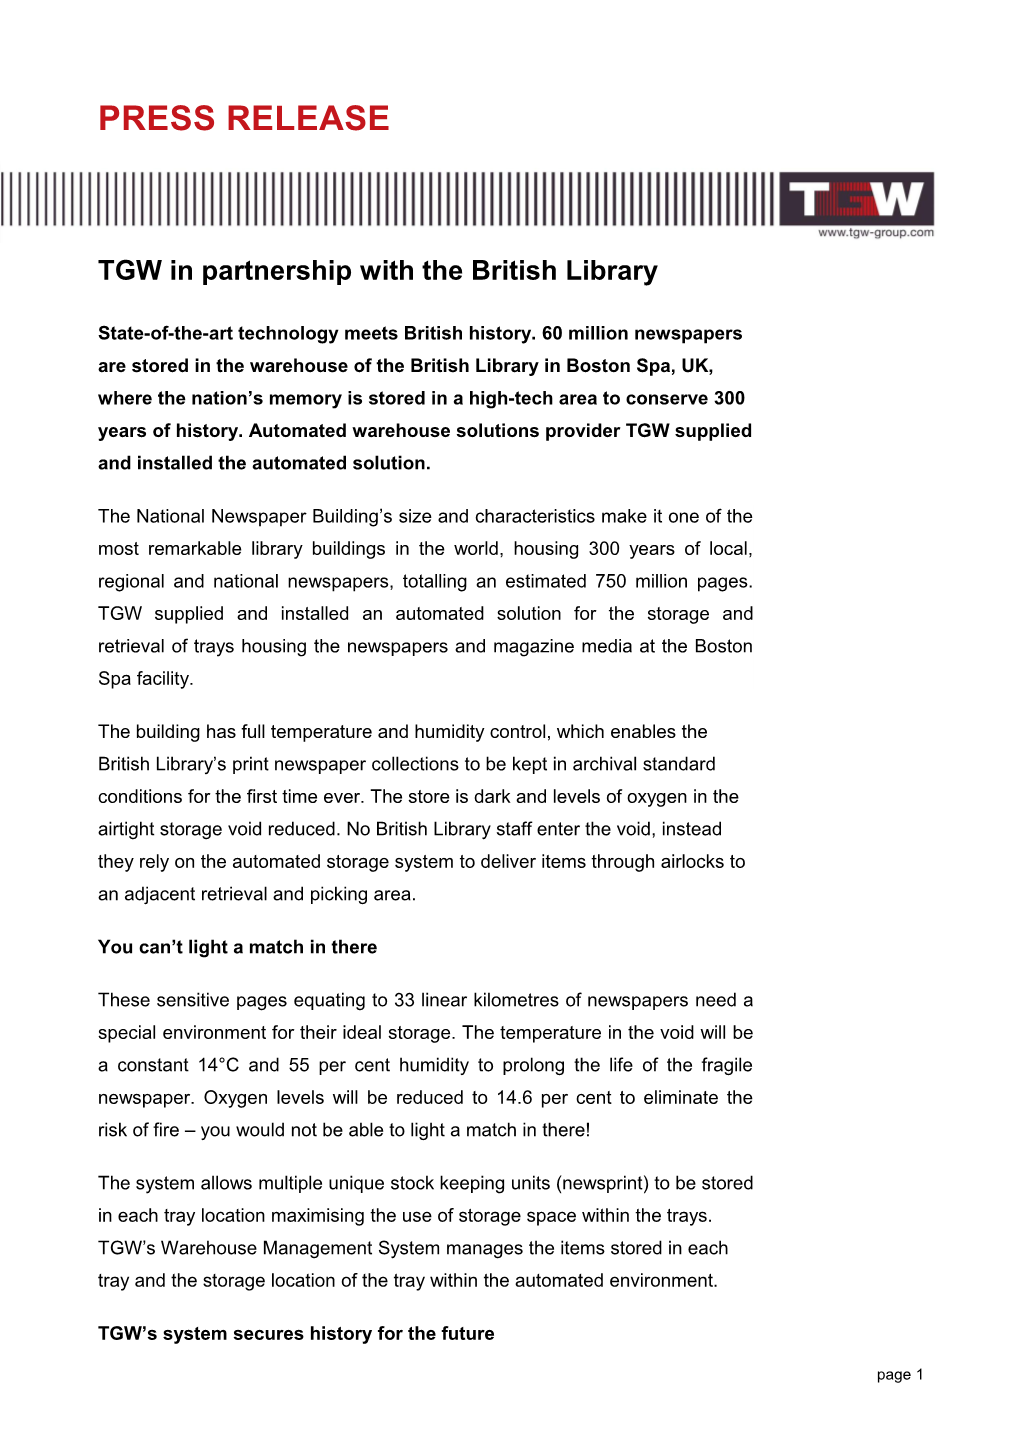 TGW in Partnership with the British Library